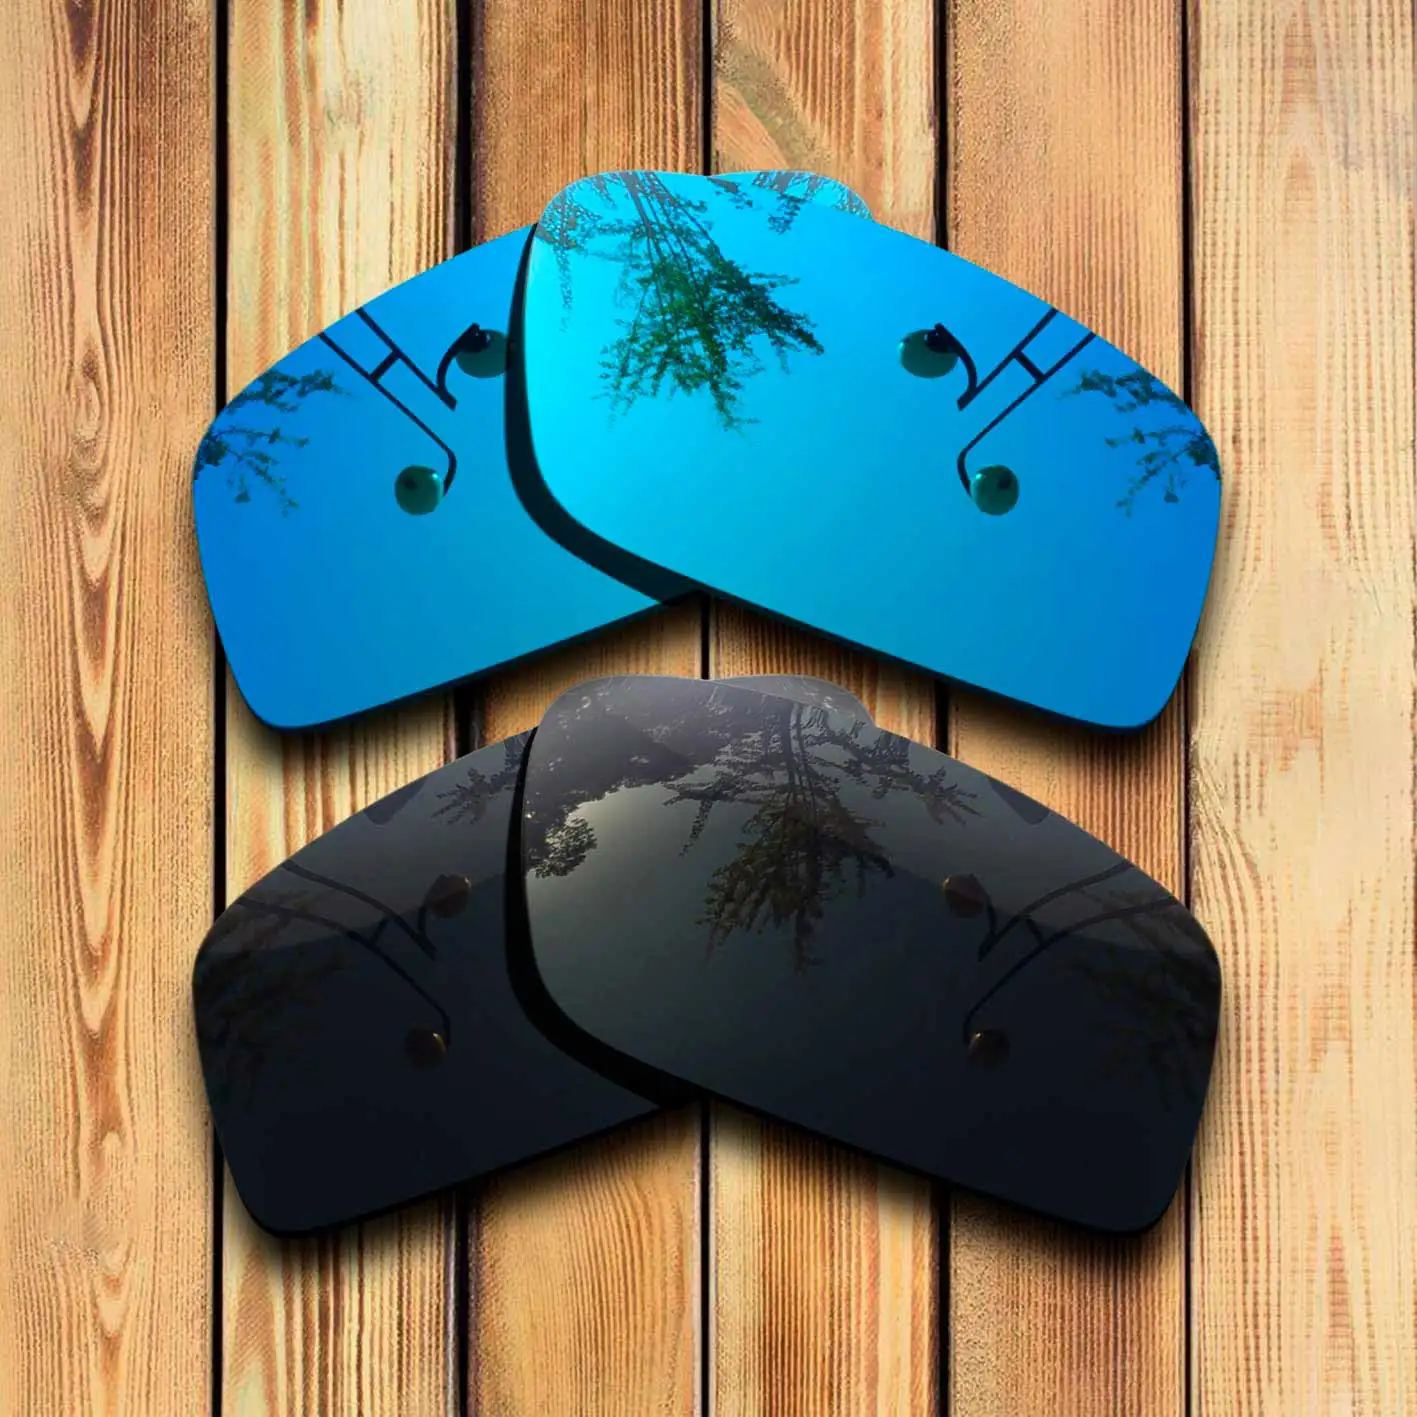 100% Precisely Cut Polarized Replacement Lenses for Twitch Sunglasses  Blue& Solid Black Combine Options